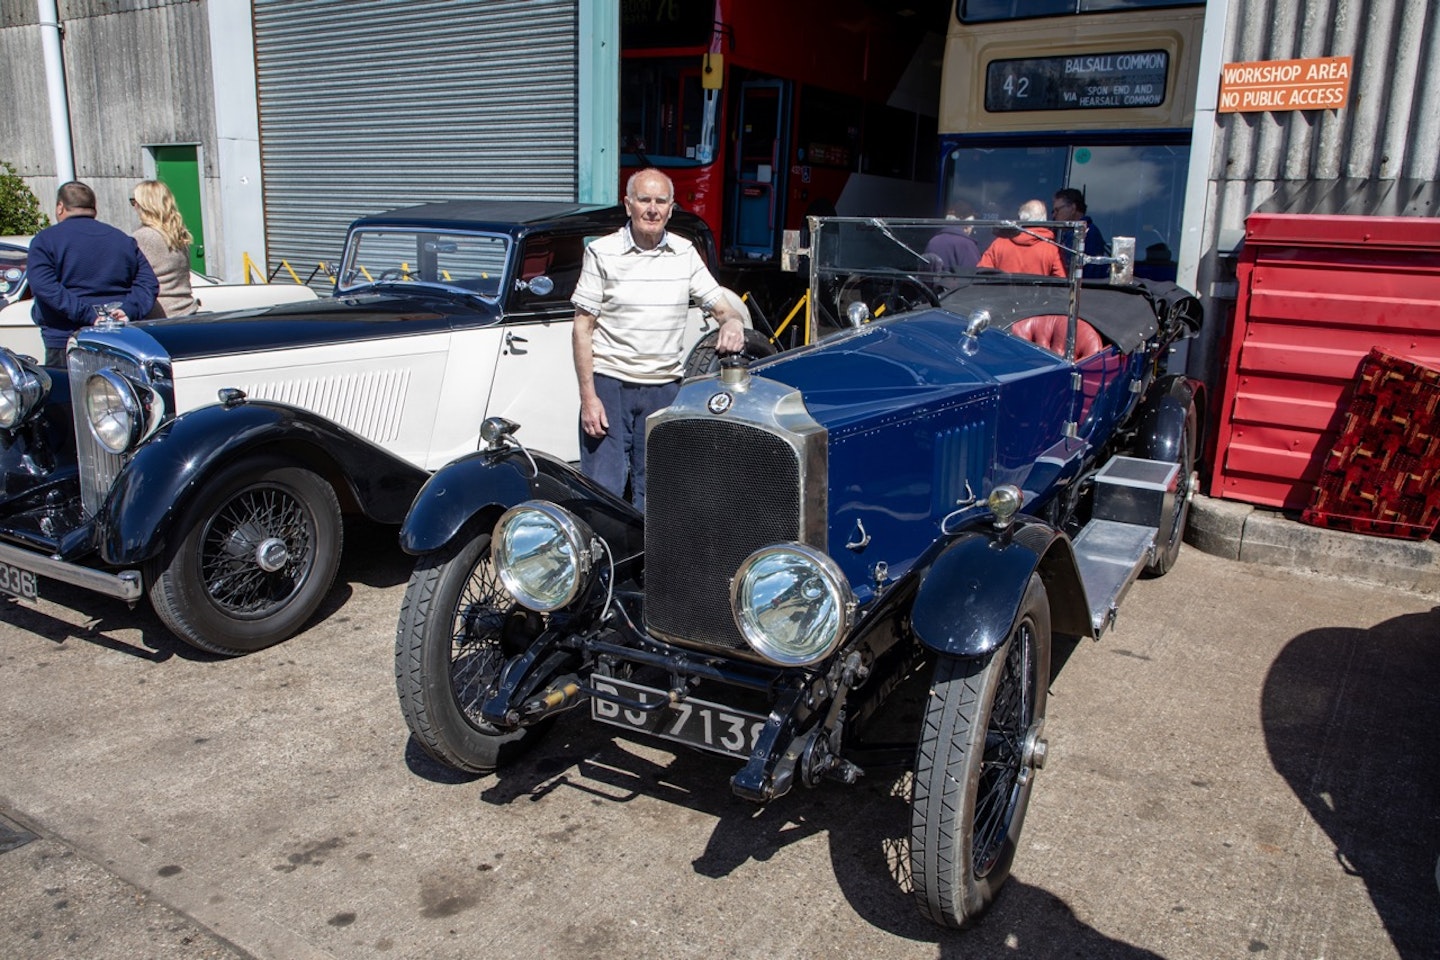 Tony Stephens from Earlswood with his glorious 1922 Vauxhall 30/98.